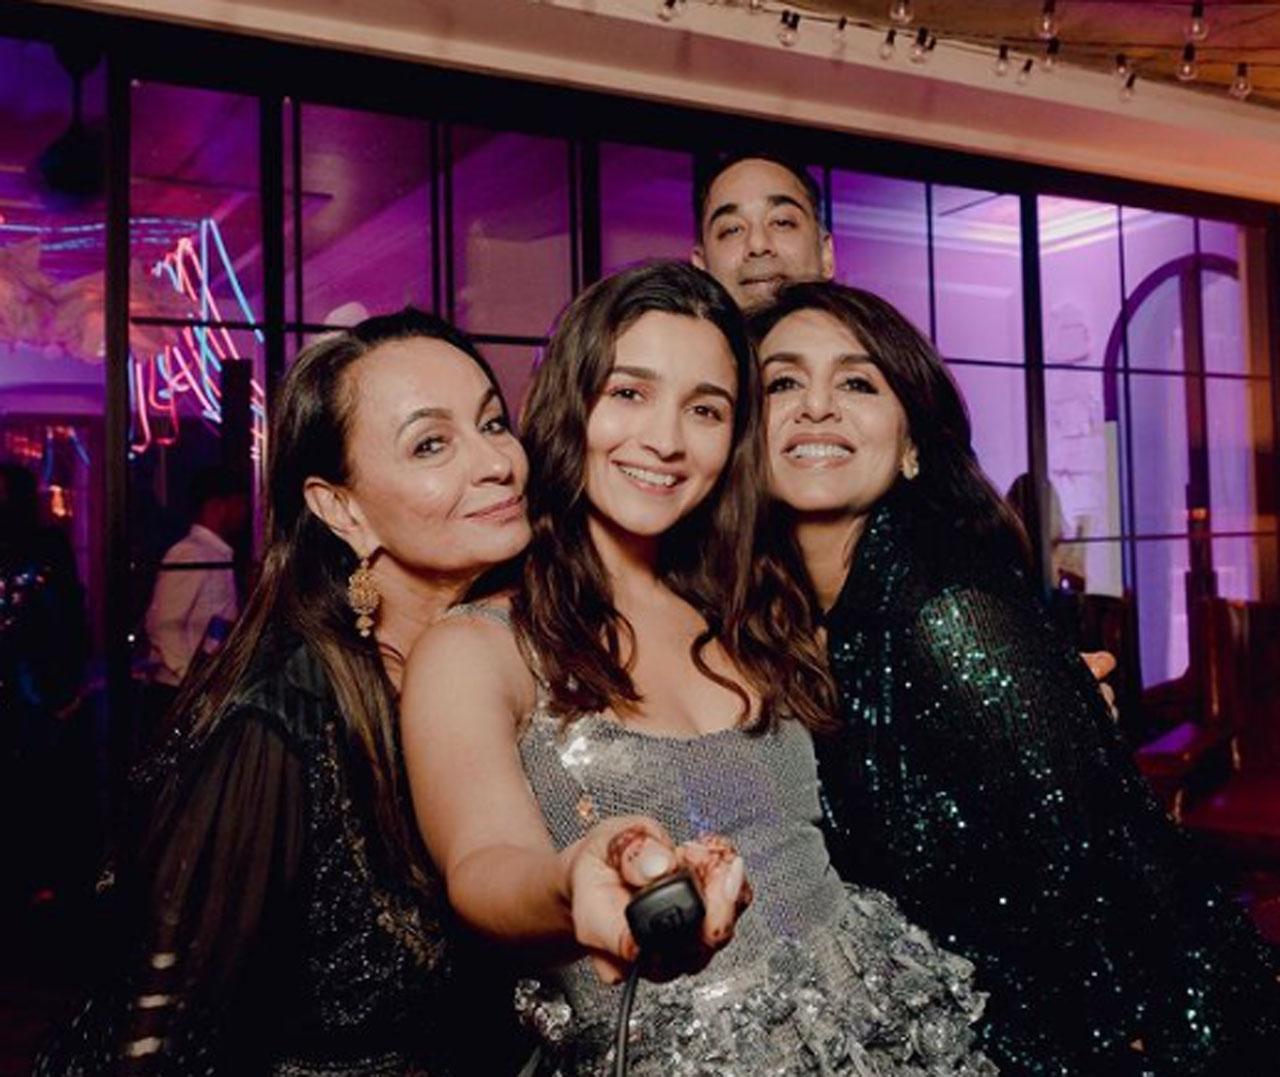 The newest bride in Tinsel Town Alia Bhatt shared an adorable picture with her two mothers- Soni Razdan and Neetu Kapoor. The ladies rocked in the selfie. Recently, Soni Razdan's sister Tina Razdan shared an unseen picture from Alia Bhatt and Ranbir Kapoor's wedding festivities. In the image, Ranbir is seen holding Alia in his arms. Also seen in the fam-jam snap are Ranbir's mother Neetu Kapoor, sister Riddhima Kapoor Sahni, Alia's father Mahesh Bhatt, and her sister Shaheen Bhatt, mother Soni Razdan, Ranbir's aunt Rima Jain and cousin Nitasha Nanda and niece Samara.